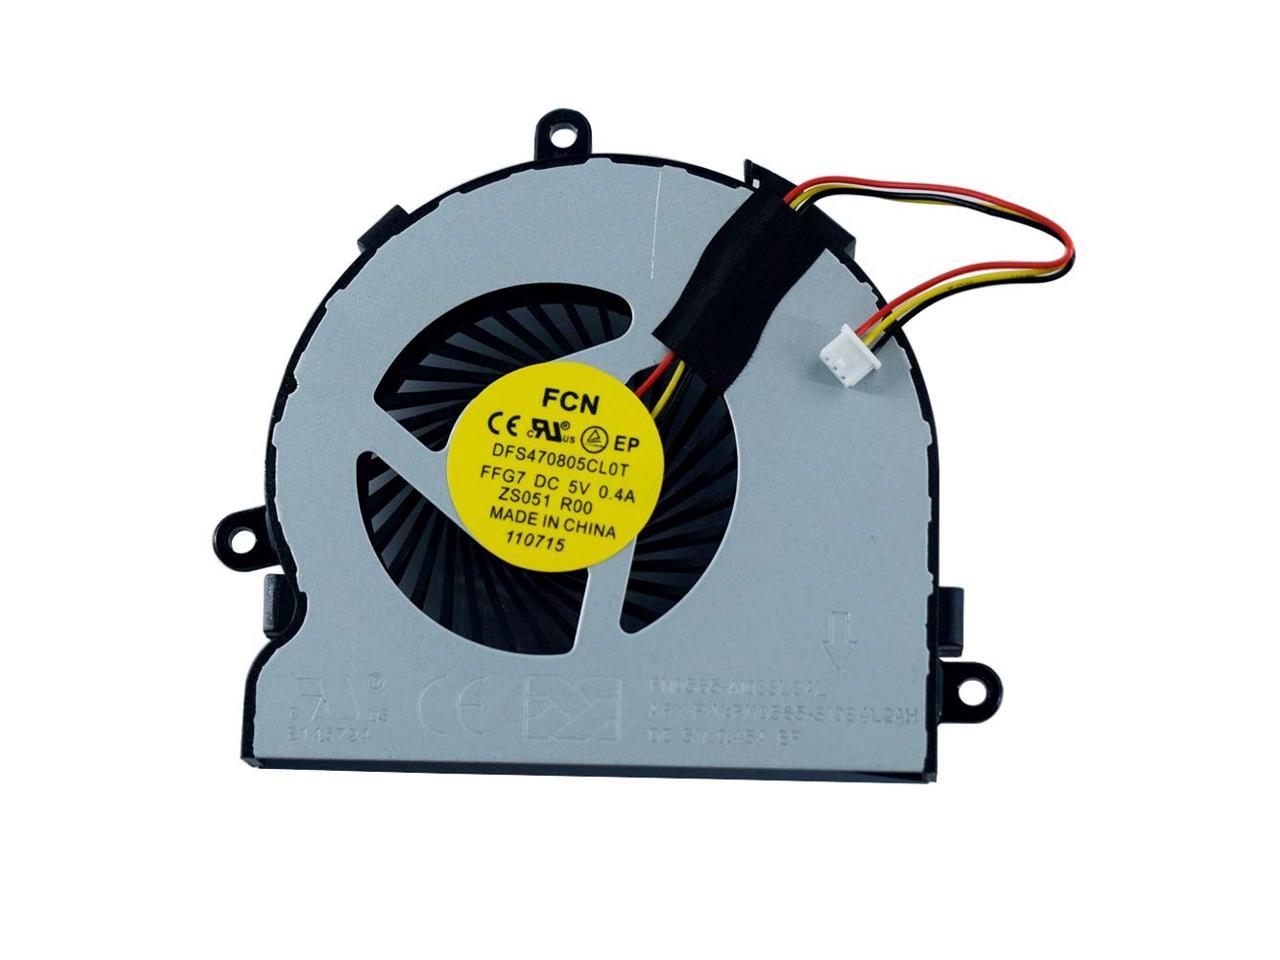 GIVWIZD Laptop Replacement CPU Cooling Fan for HP 753894-001 753895-001 759880-001 DC28000E3F0DC28000E3S0